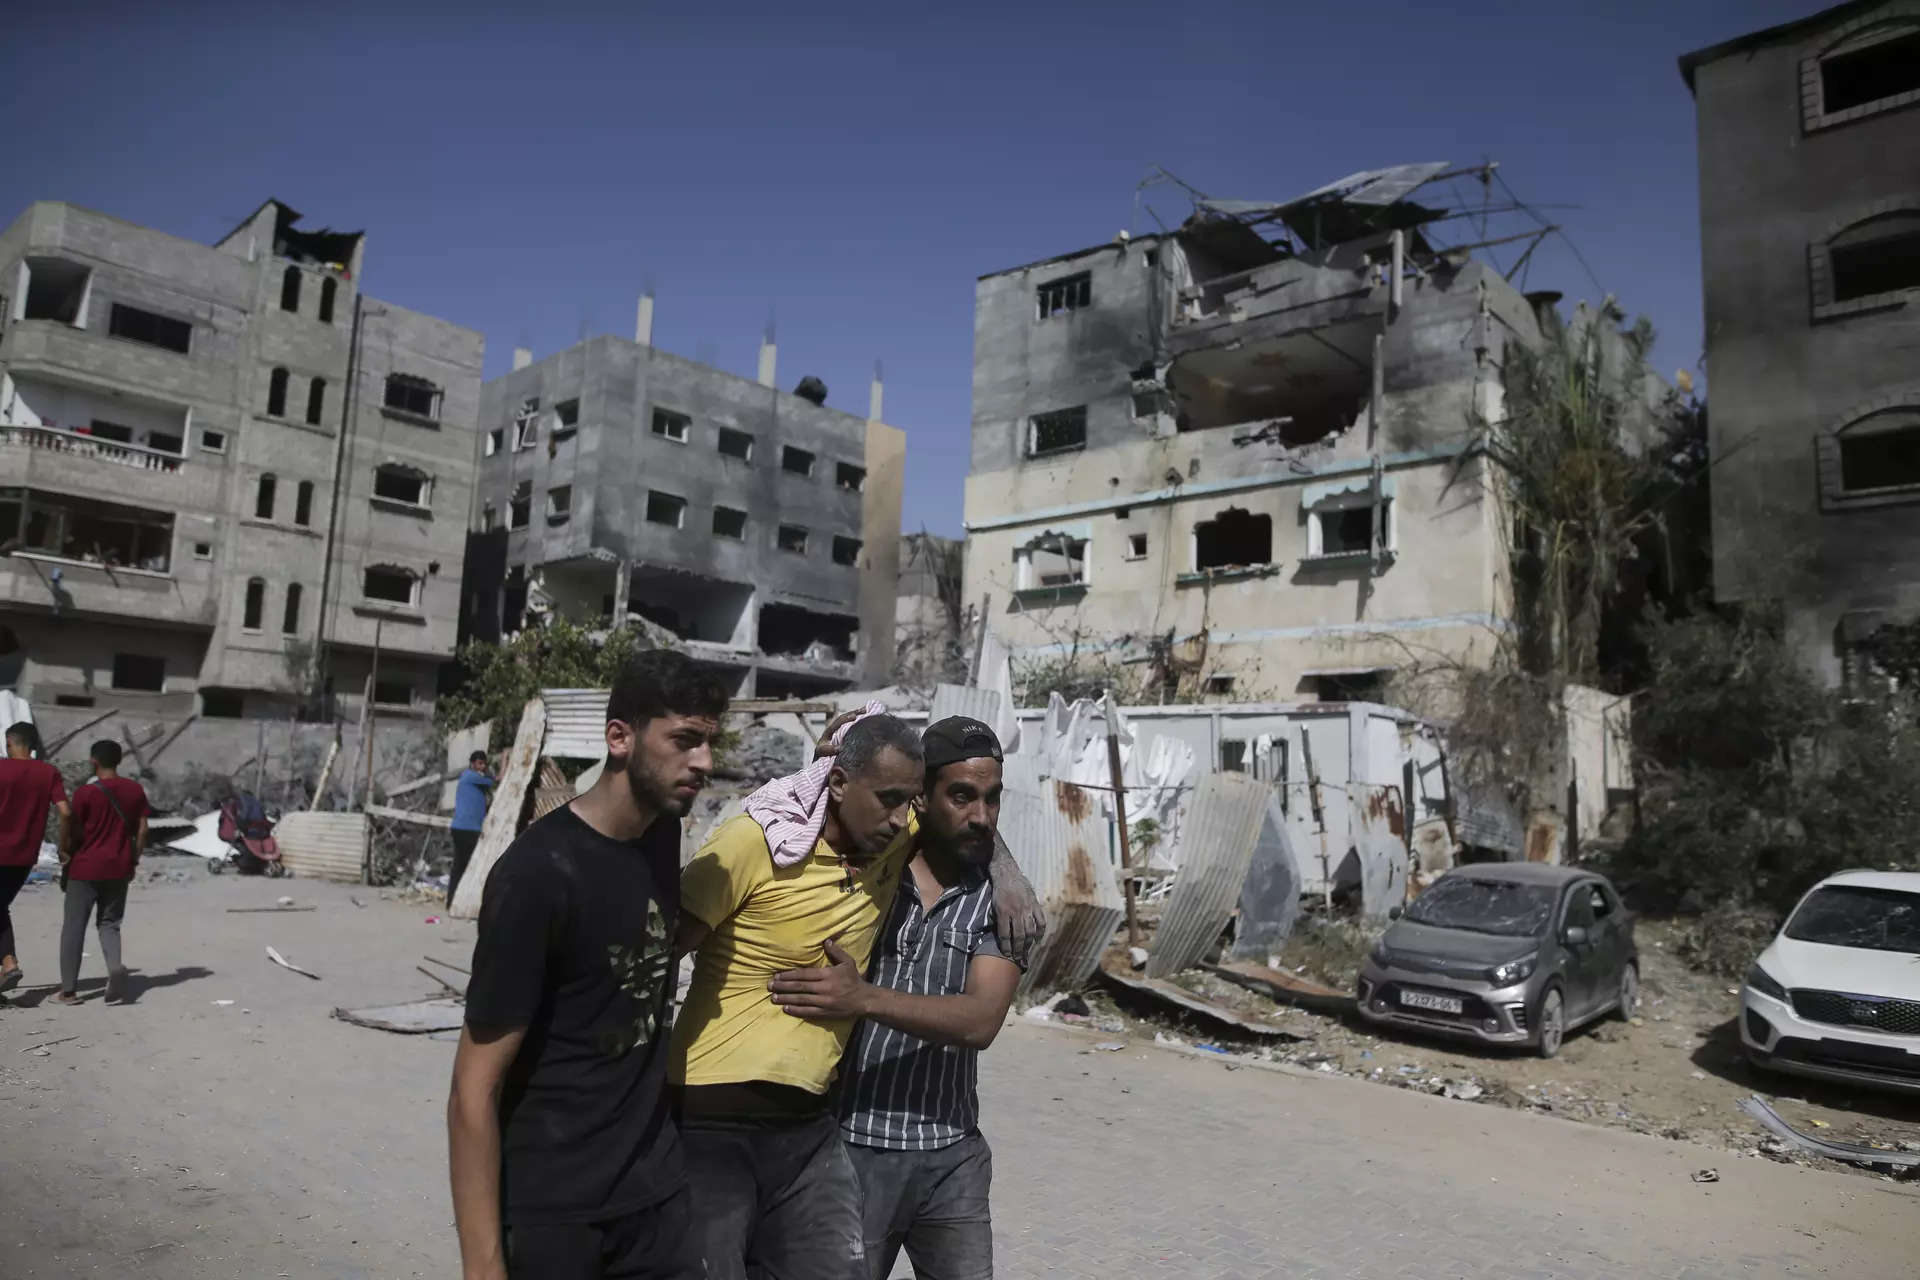 Ceasefire talks in jeopardy after Israel accuses Hamas of 'rejecting' proposal